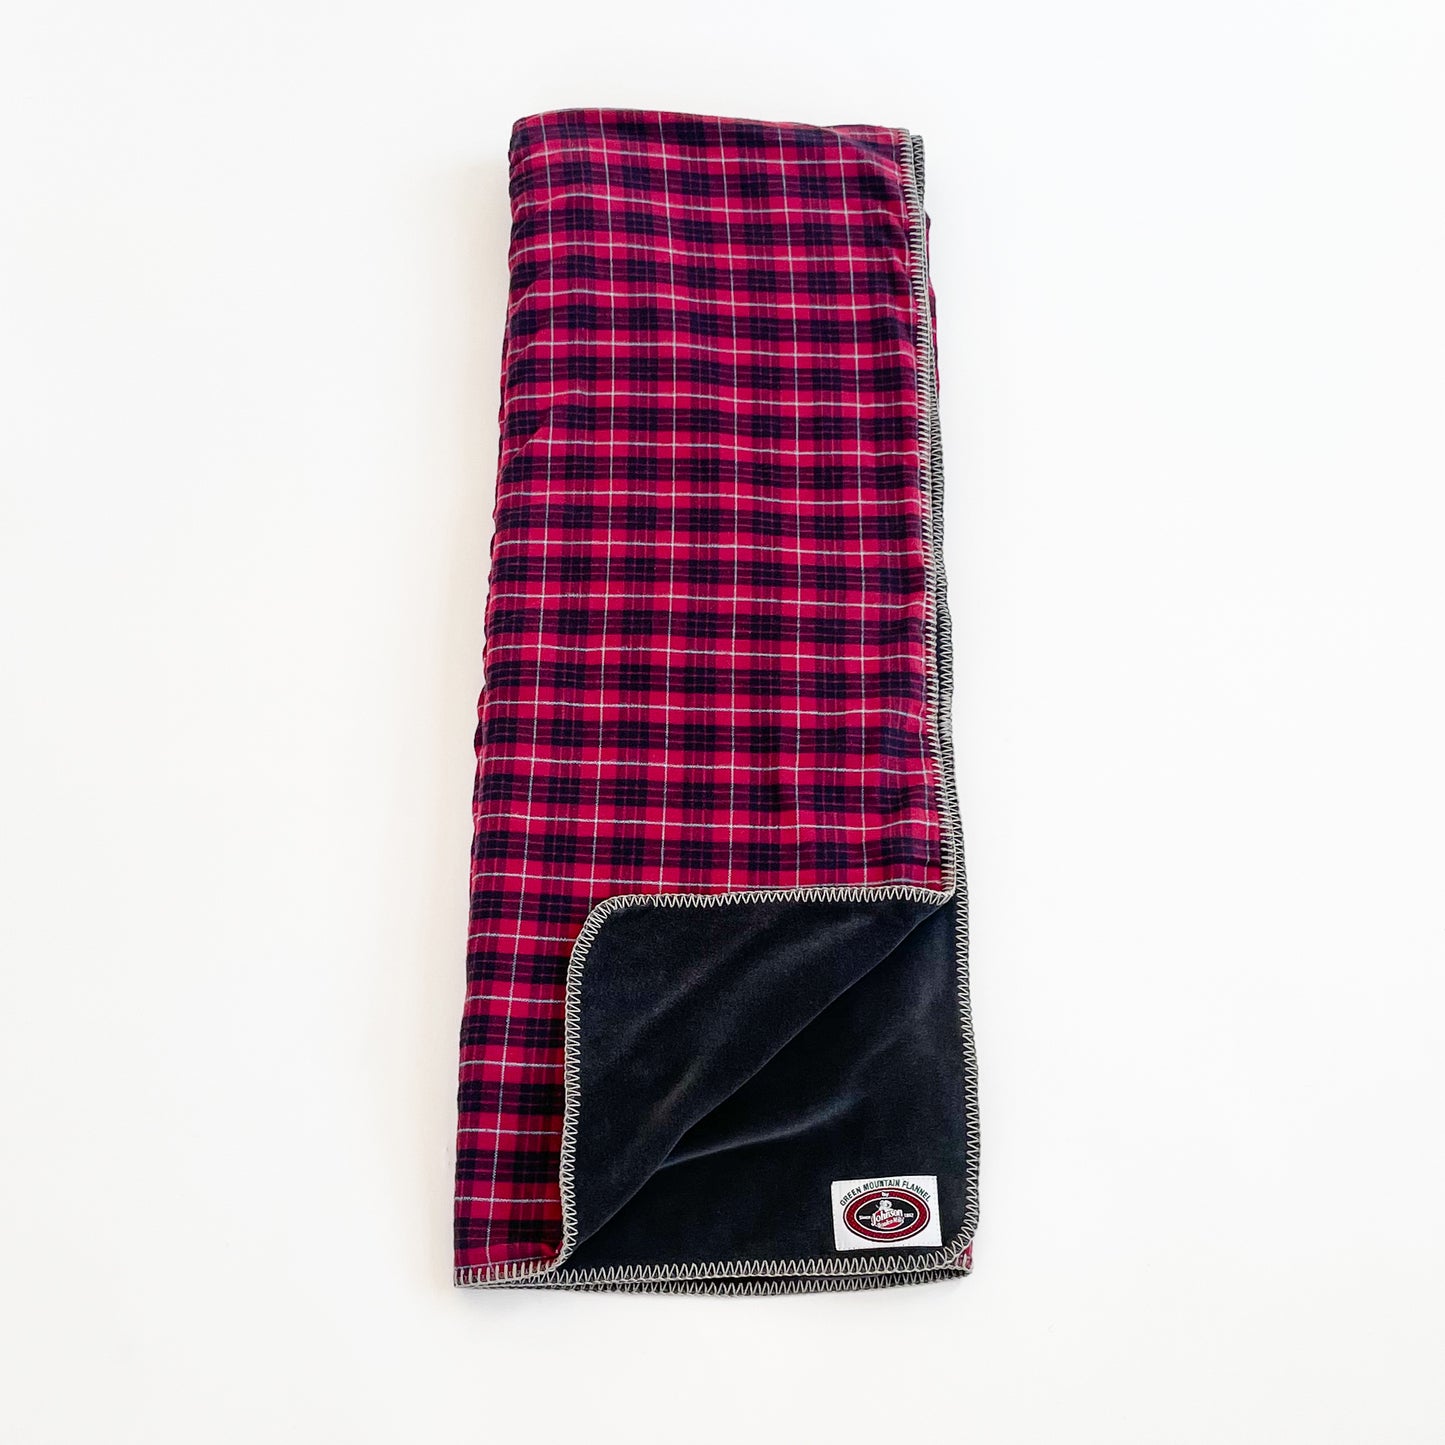 Red, black with white pinstripe plaid Flannel throw blanket laid out